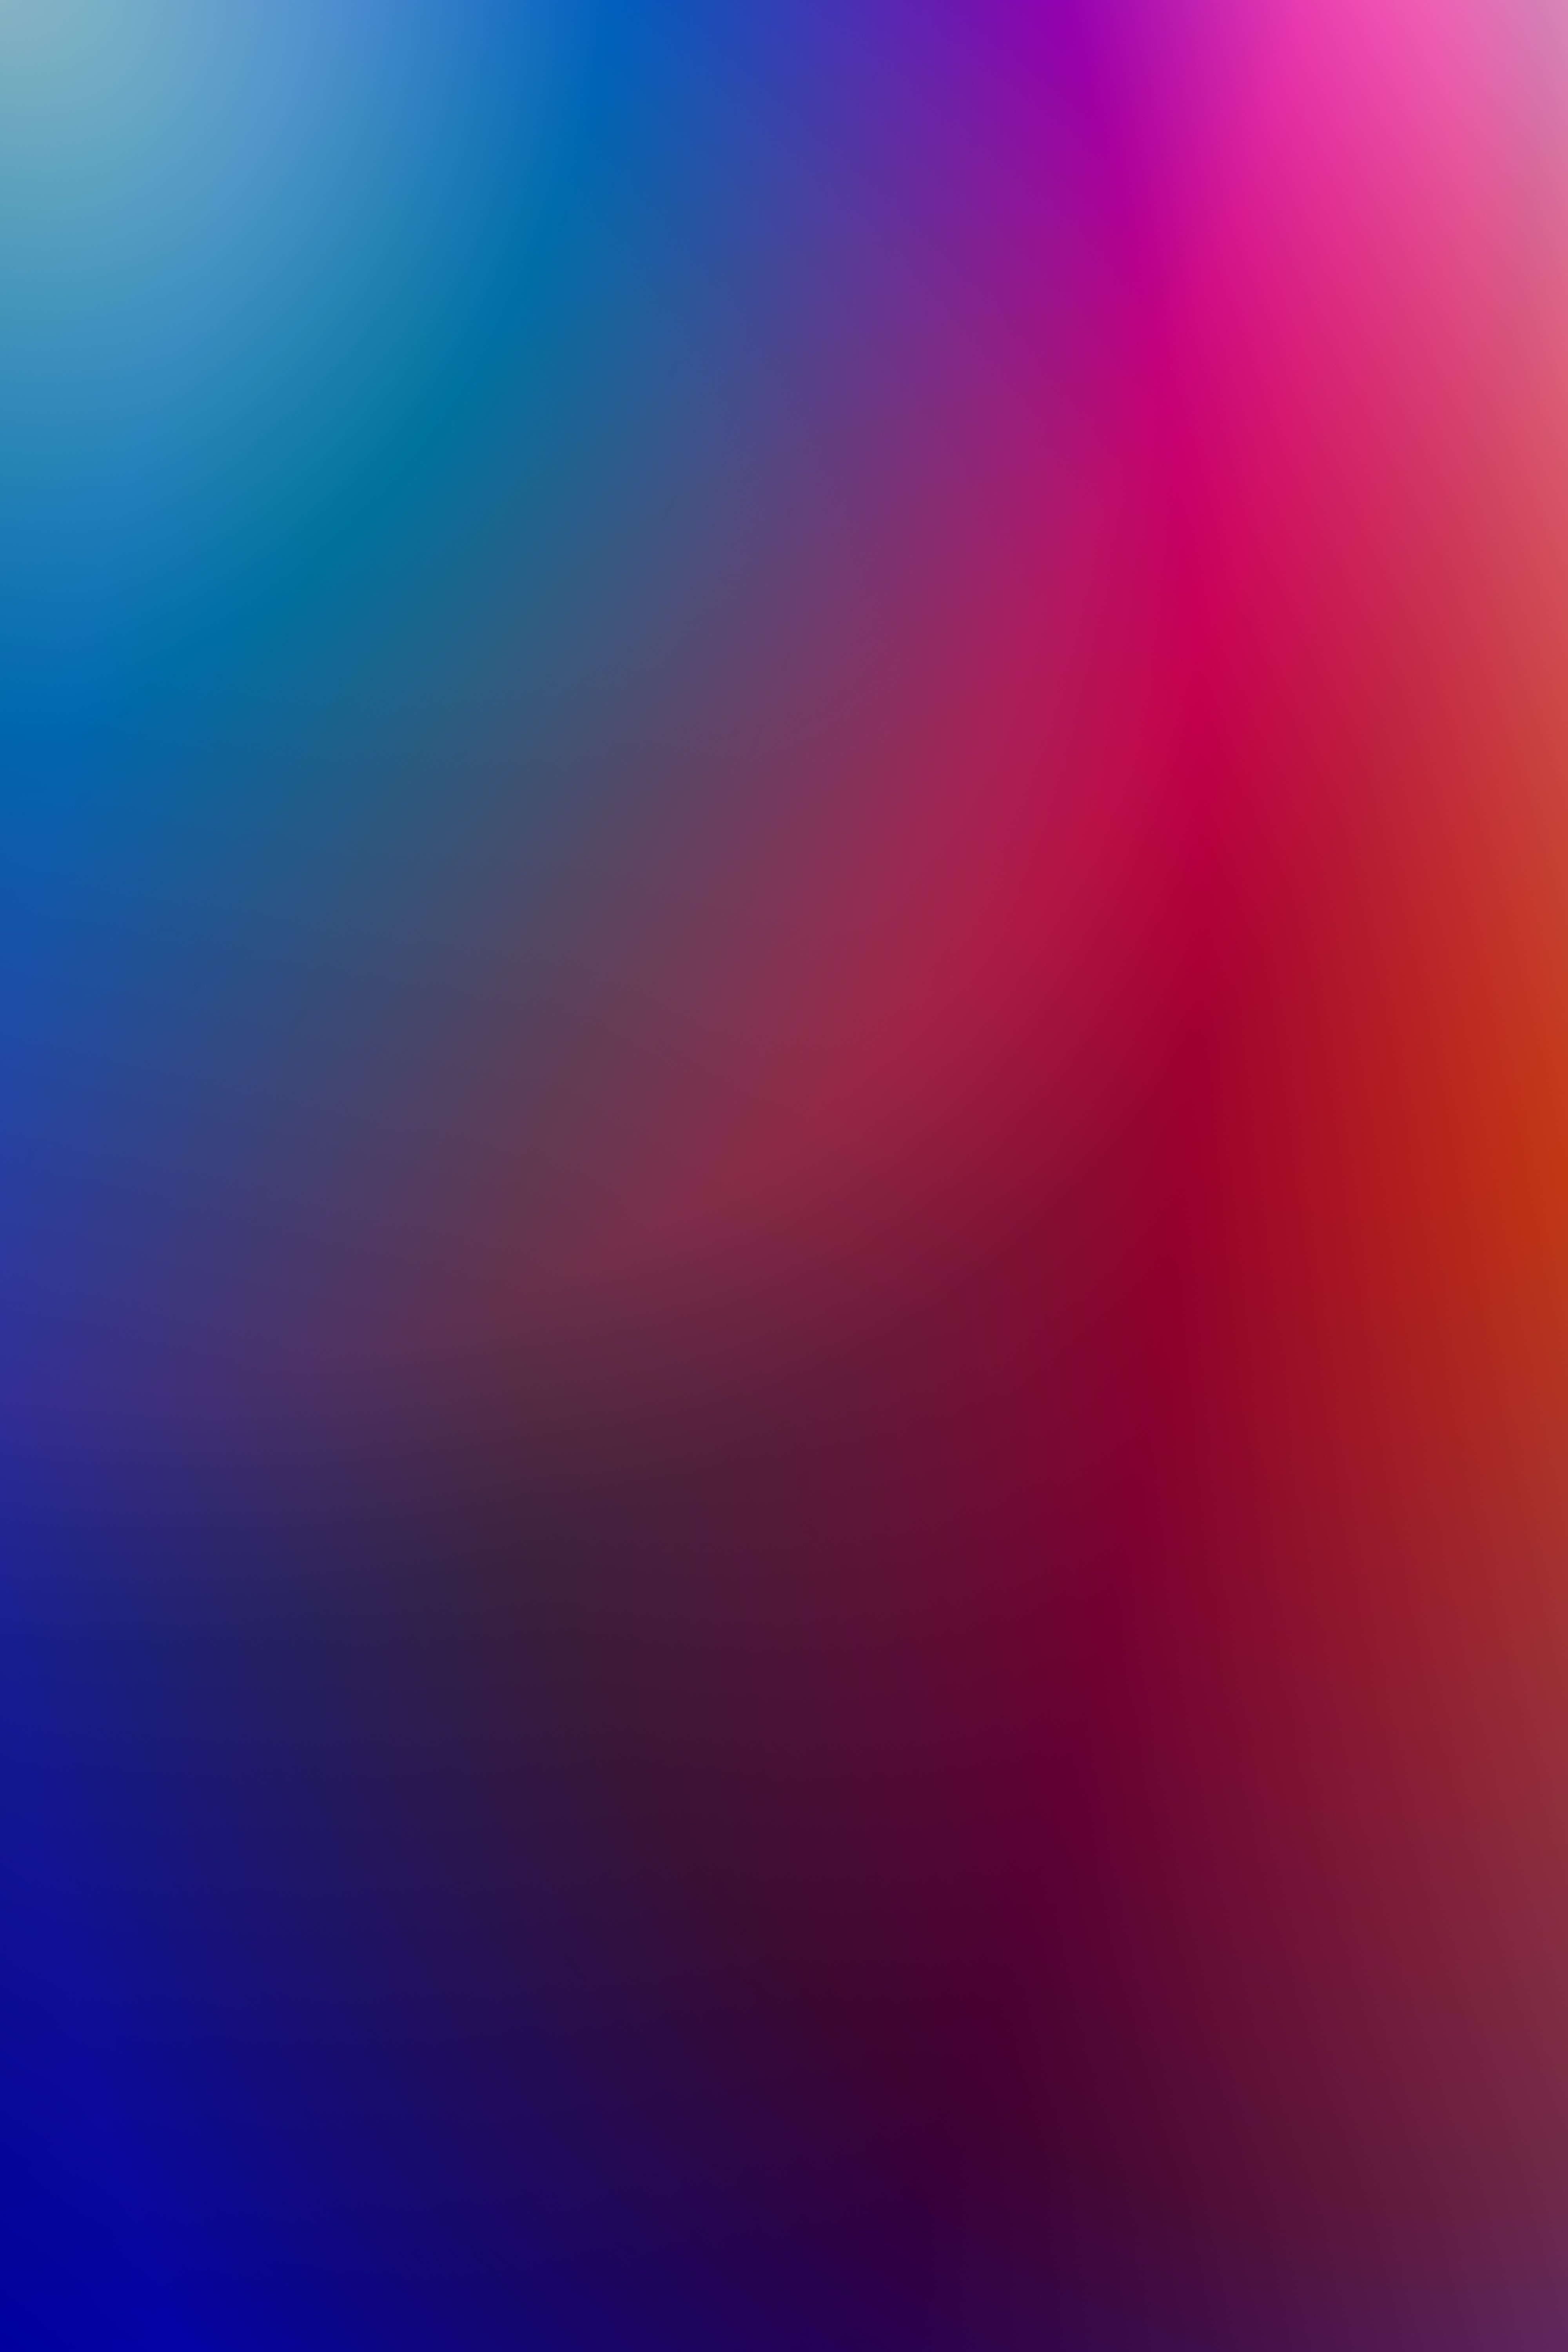 Wallpaper Full HD stains, abstract, multicolored, motley, spots, gradient